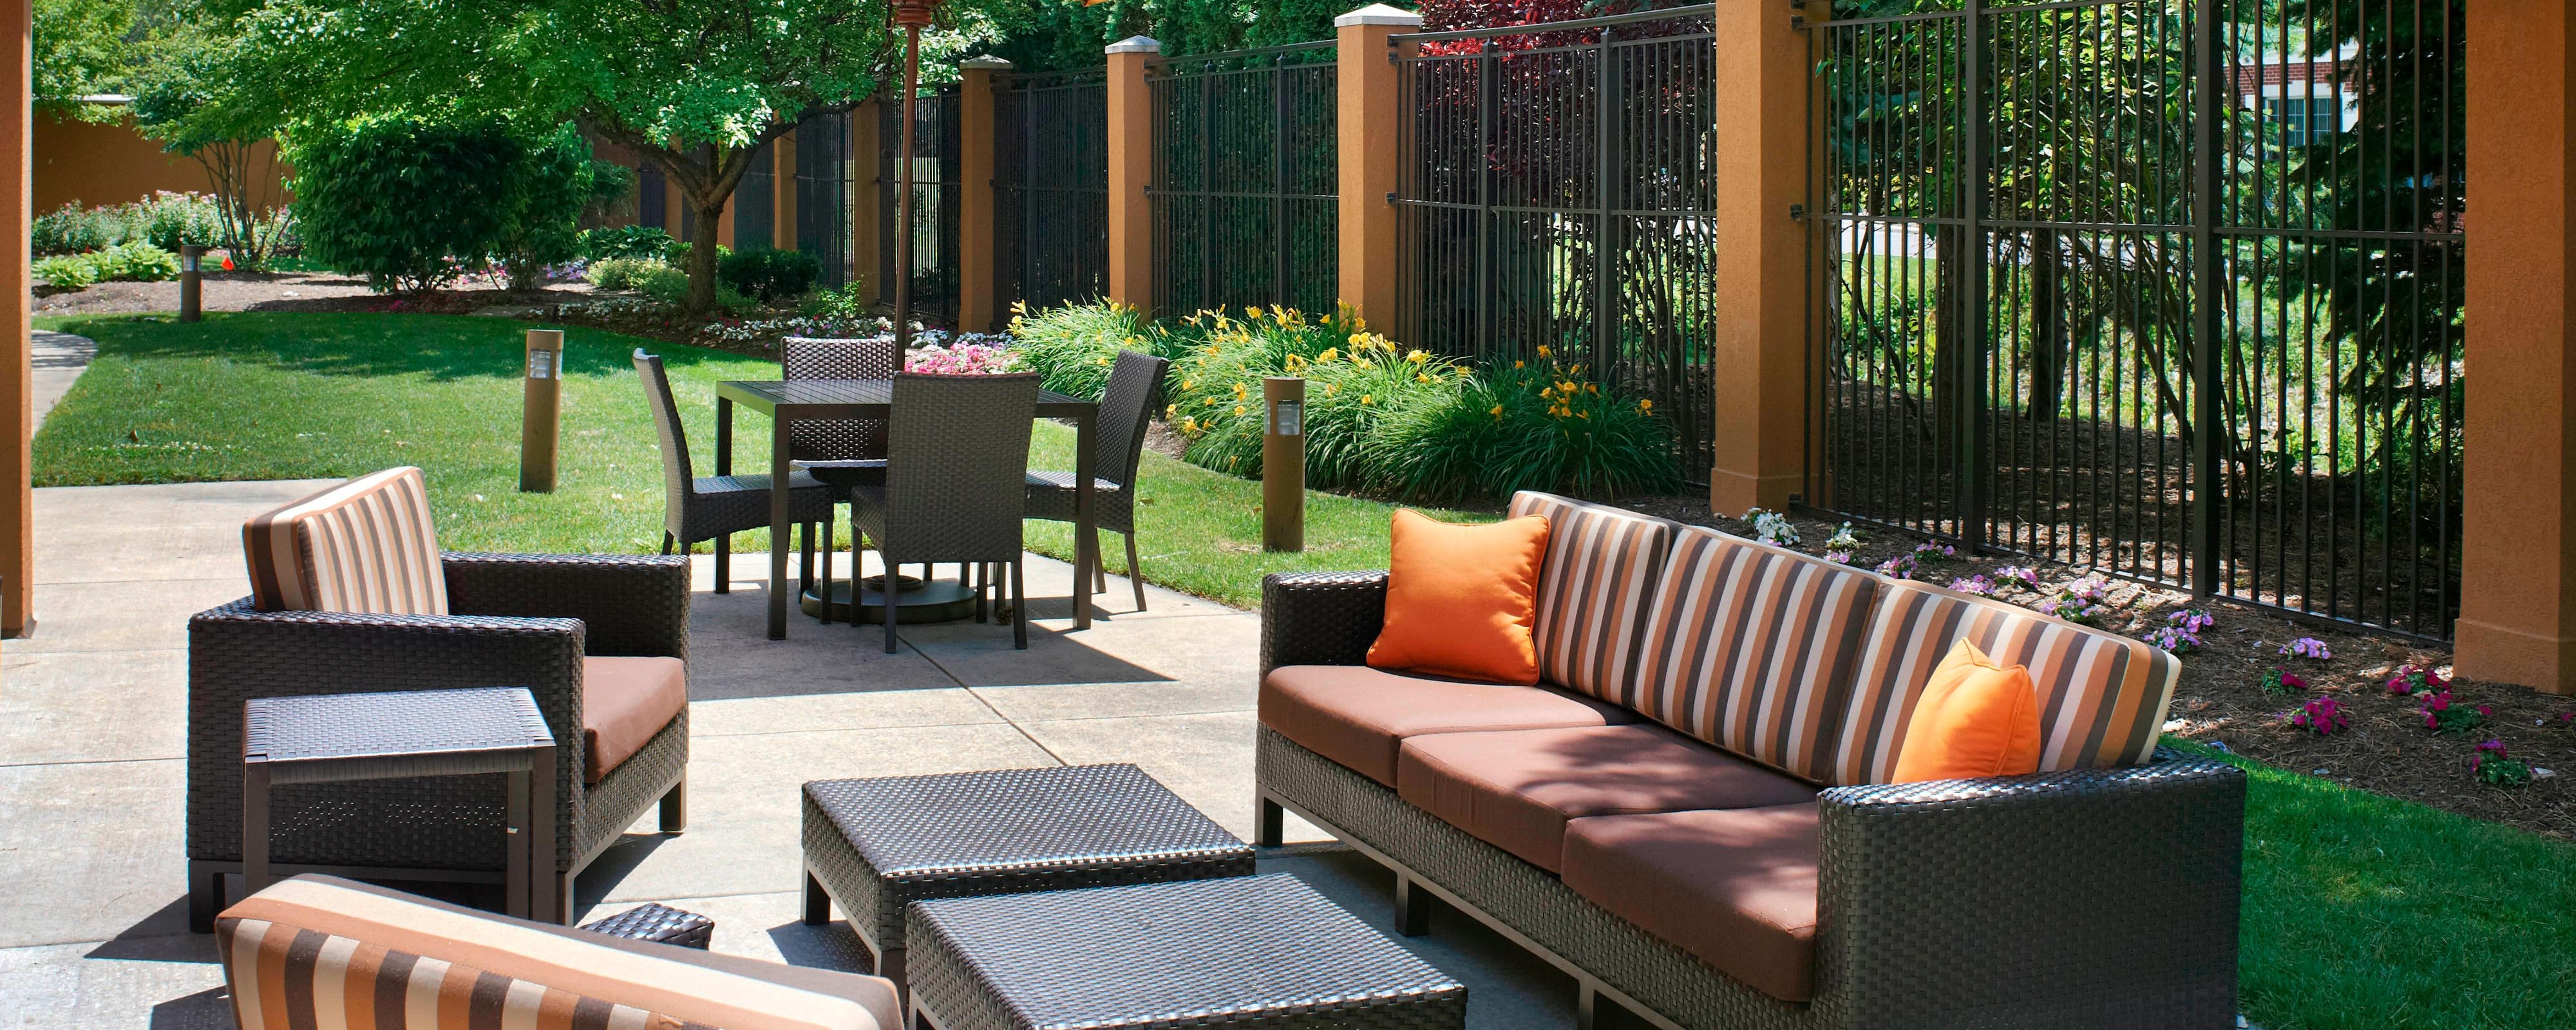 Outdoor terrace seating